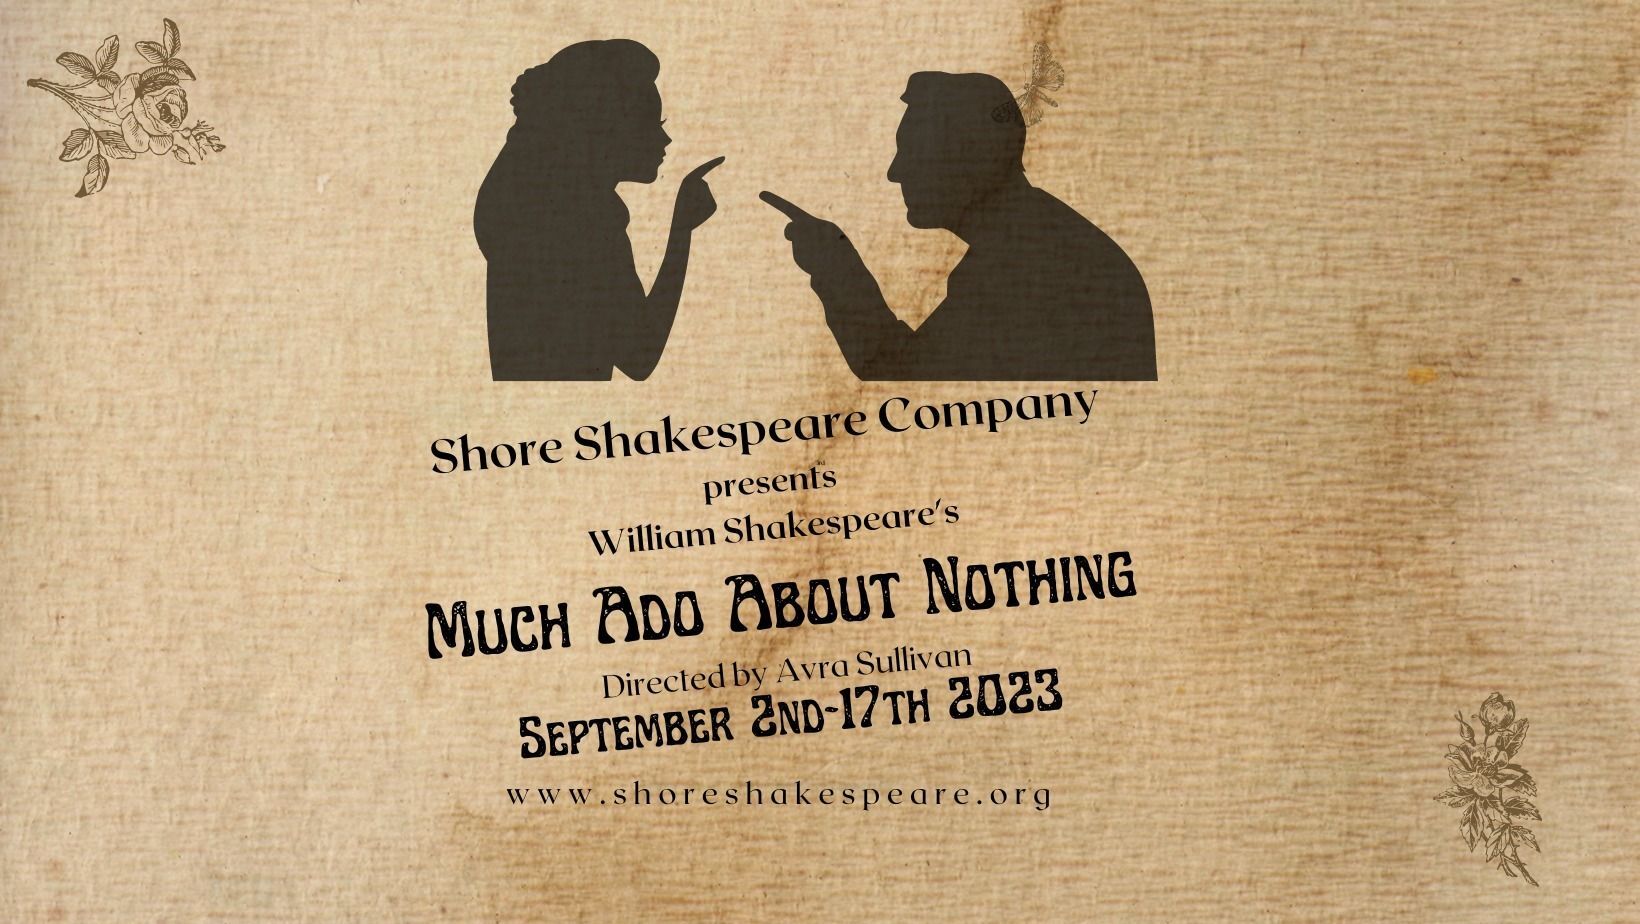 Shore Shakespeare - Much Ado About Nothing: September 3